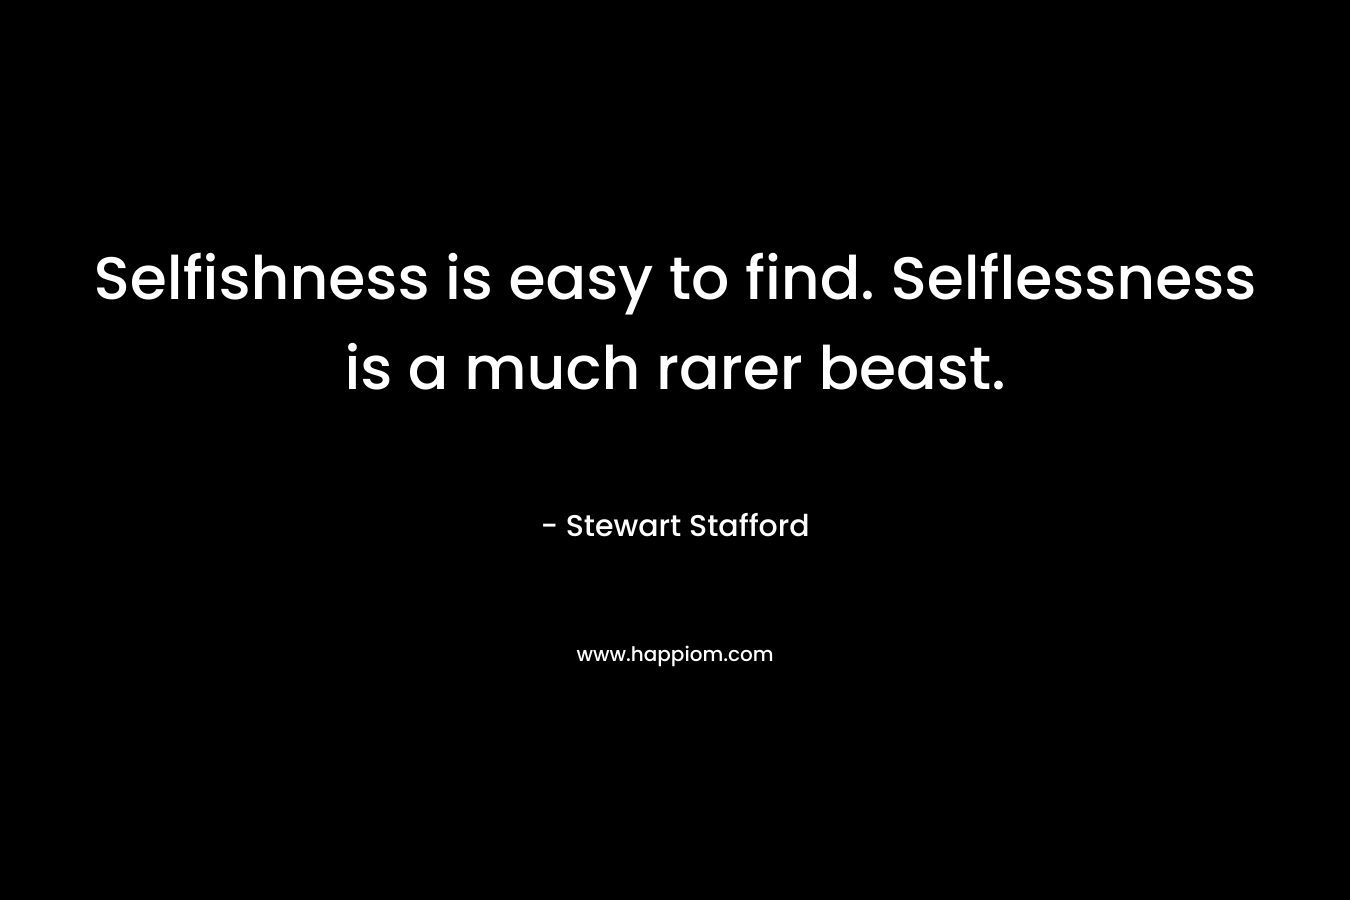 Selfishness is easy to find. Selflessness is a much rarer beast. – Stewart Stafford